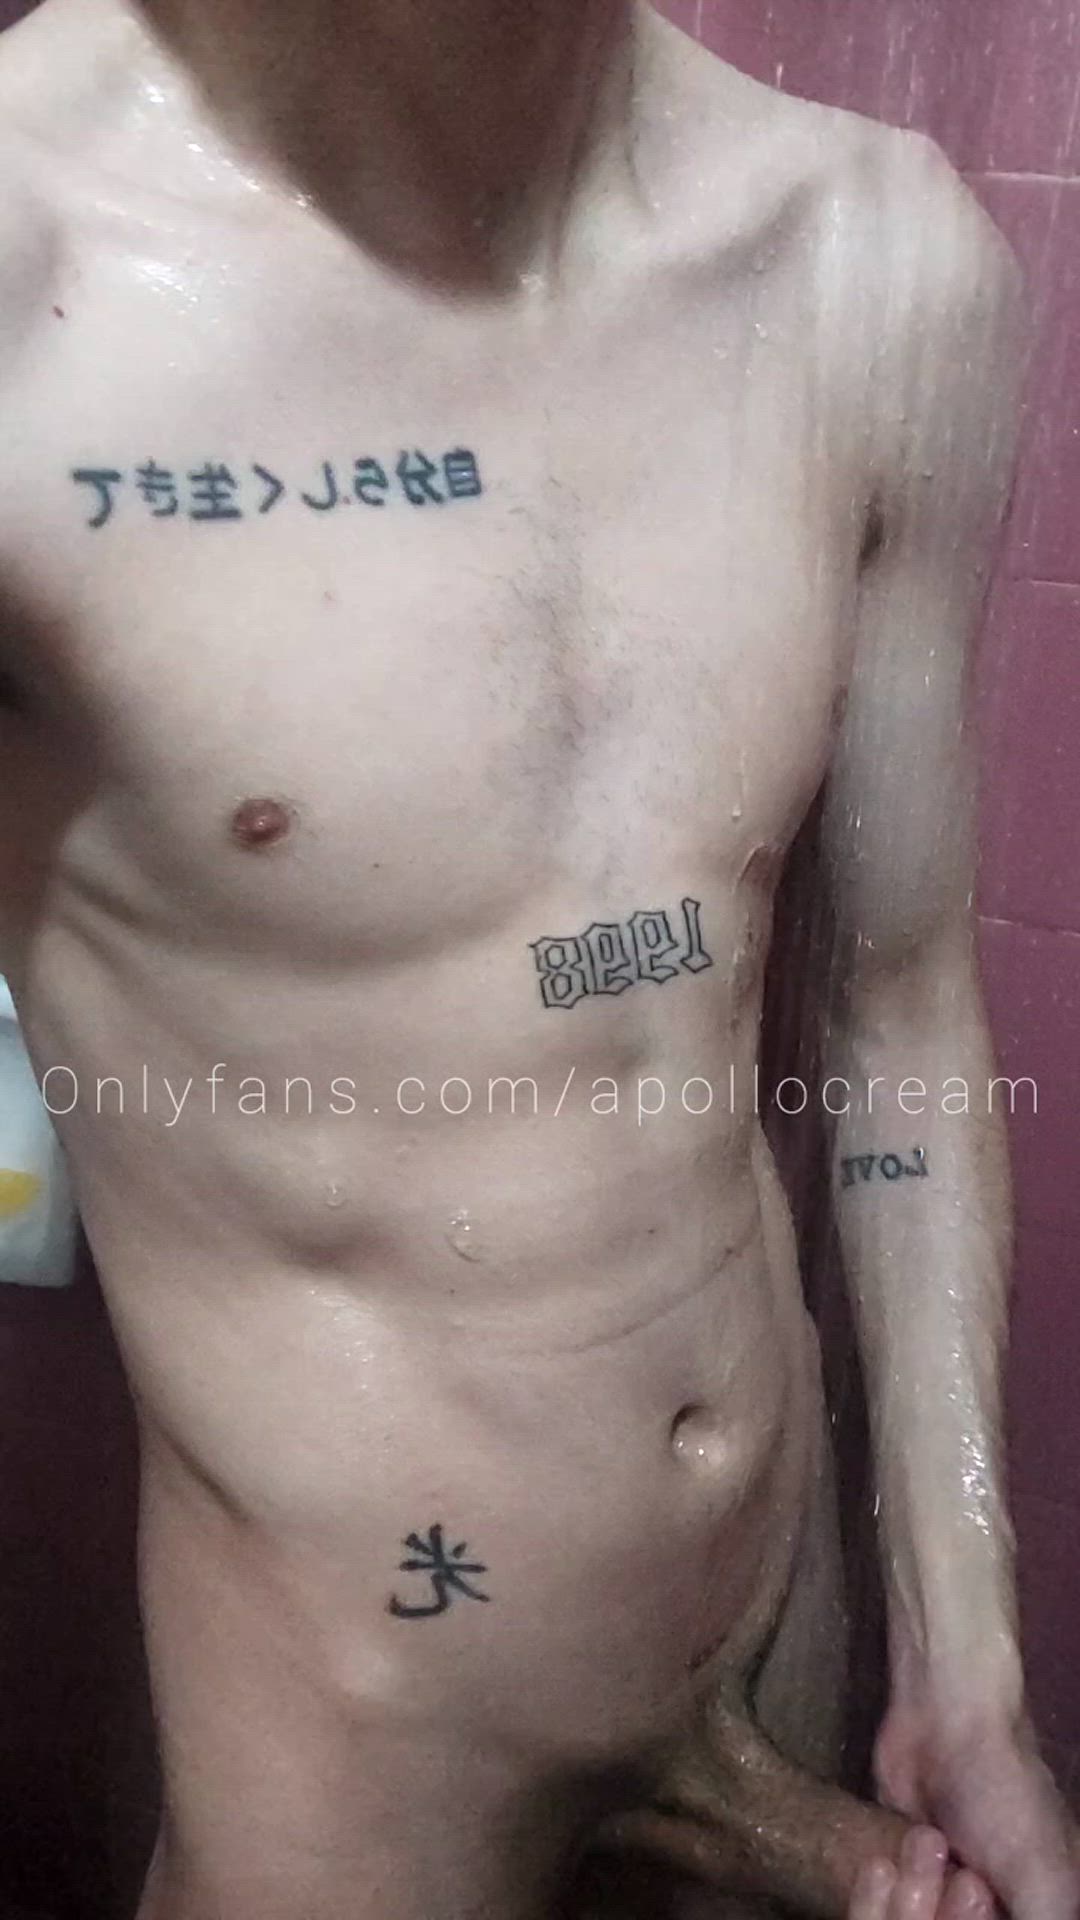 Big Dick porn video with onlyfans model Apollo Cream 🍨 <strong>@apollocream</strong>